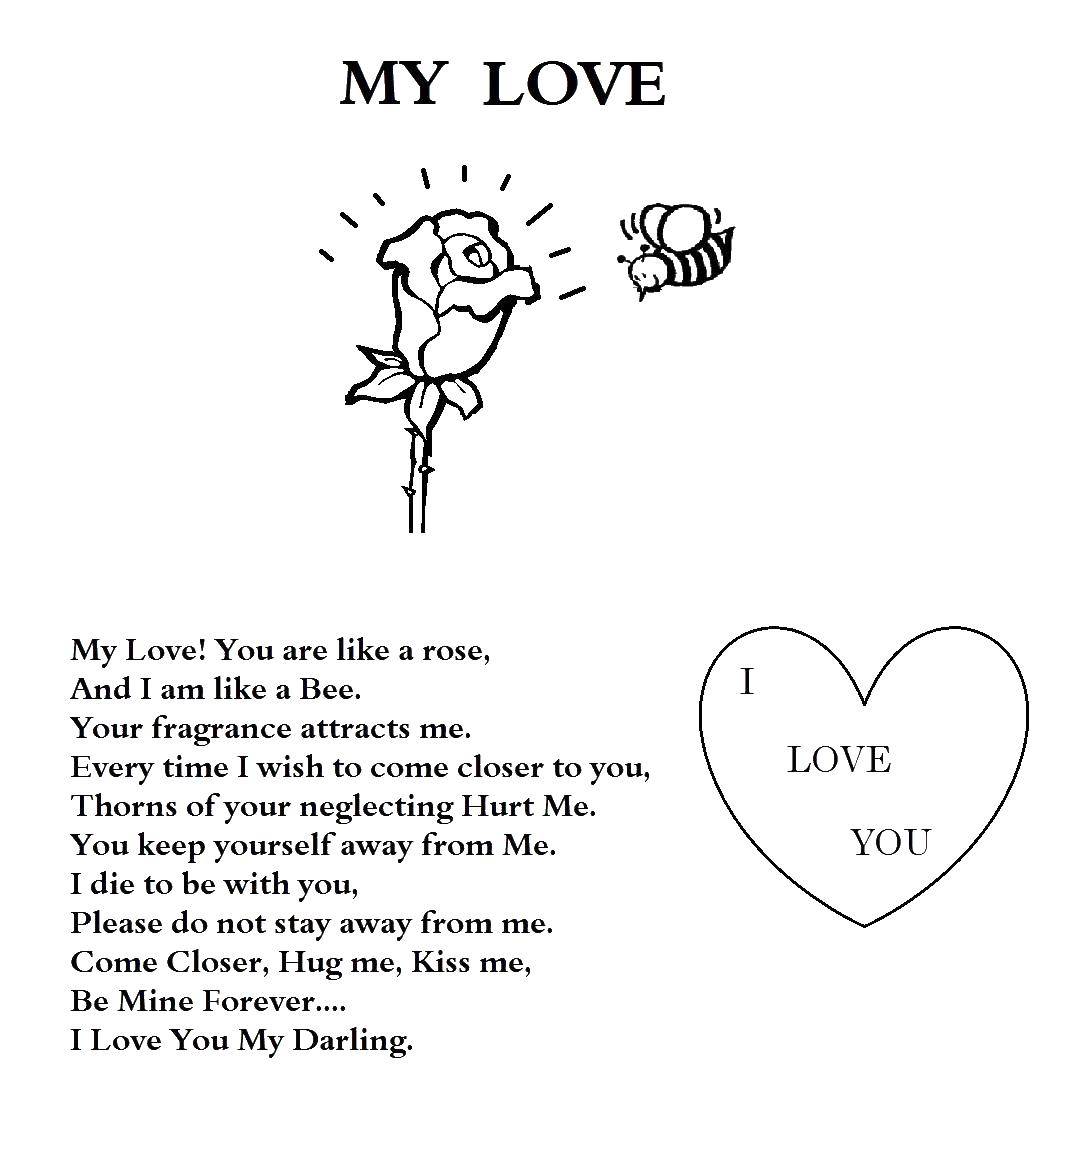 Coloring My love. Category I love you. Tags:  rose, a poem, my love, English.